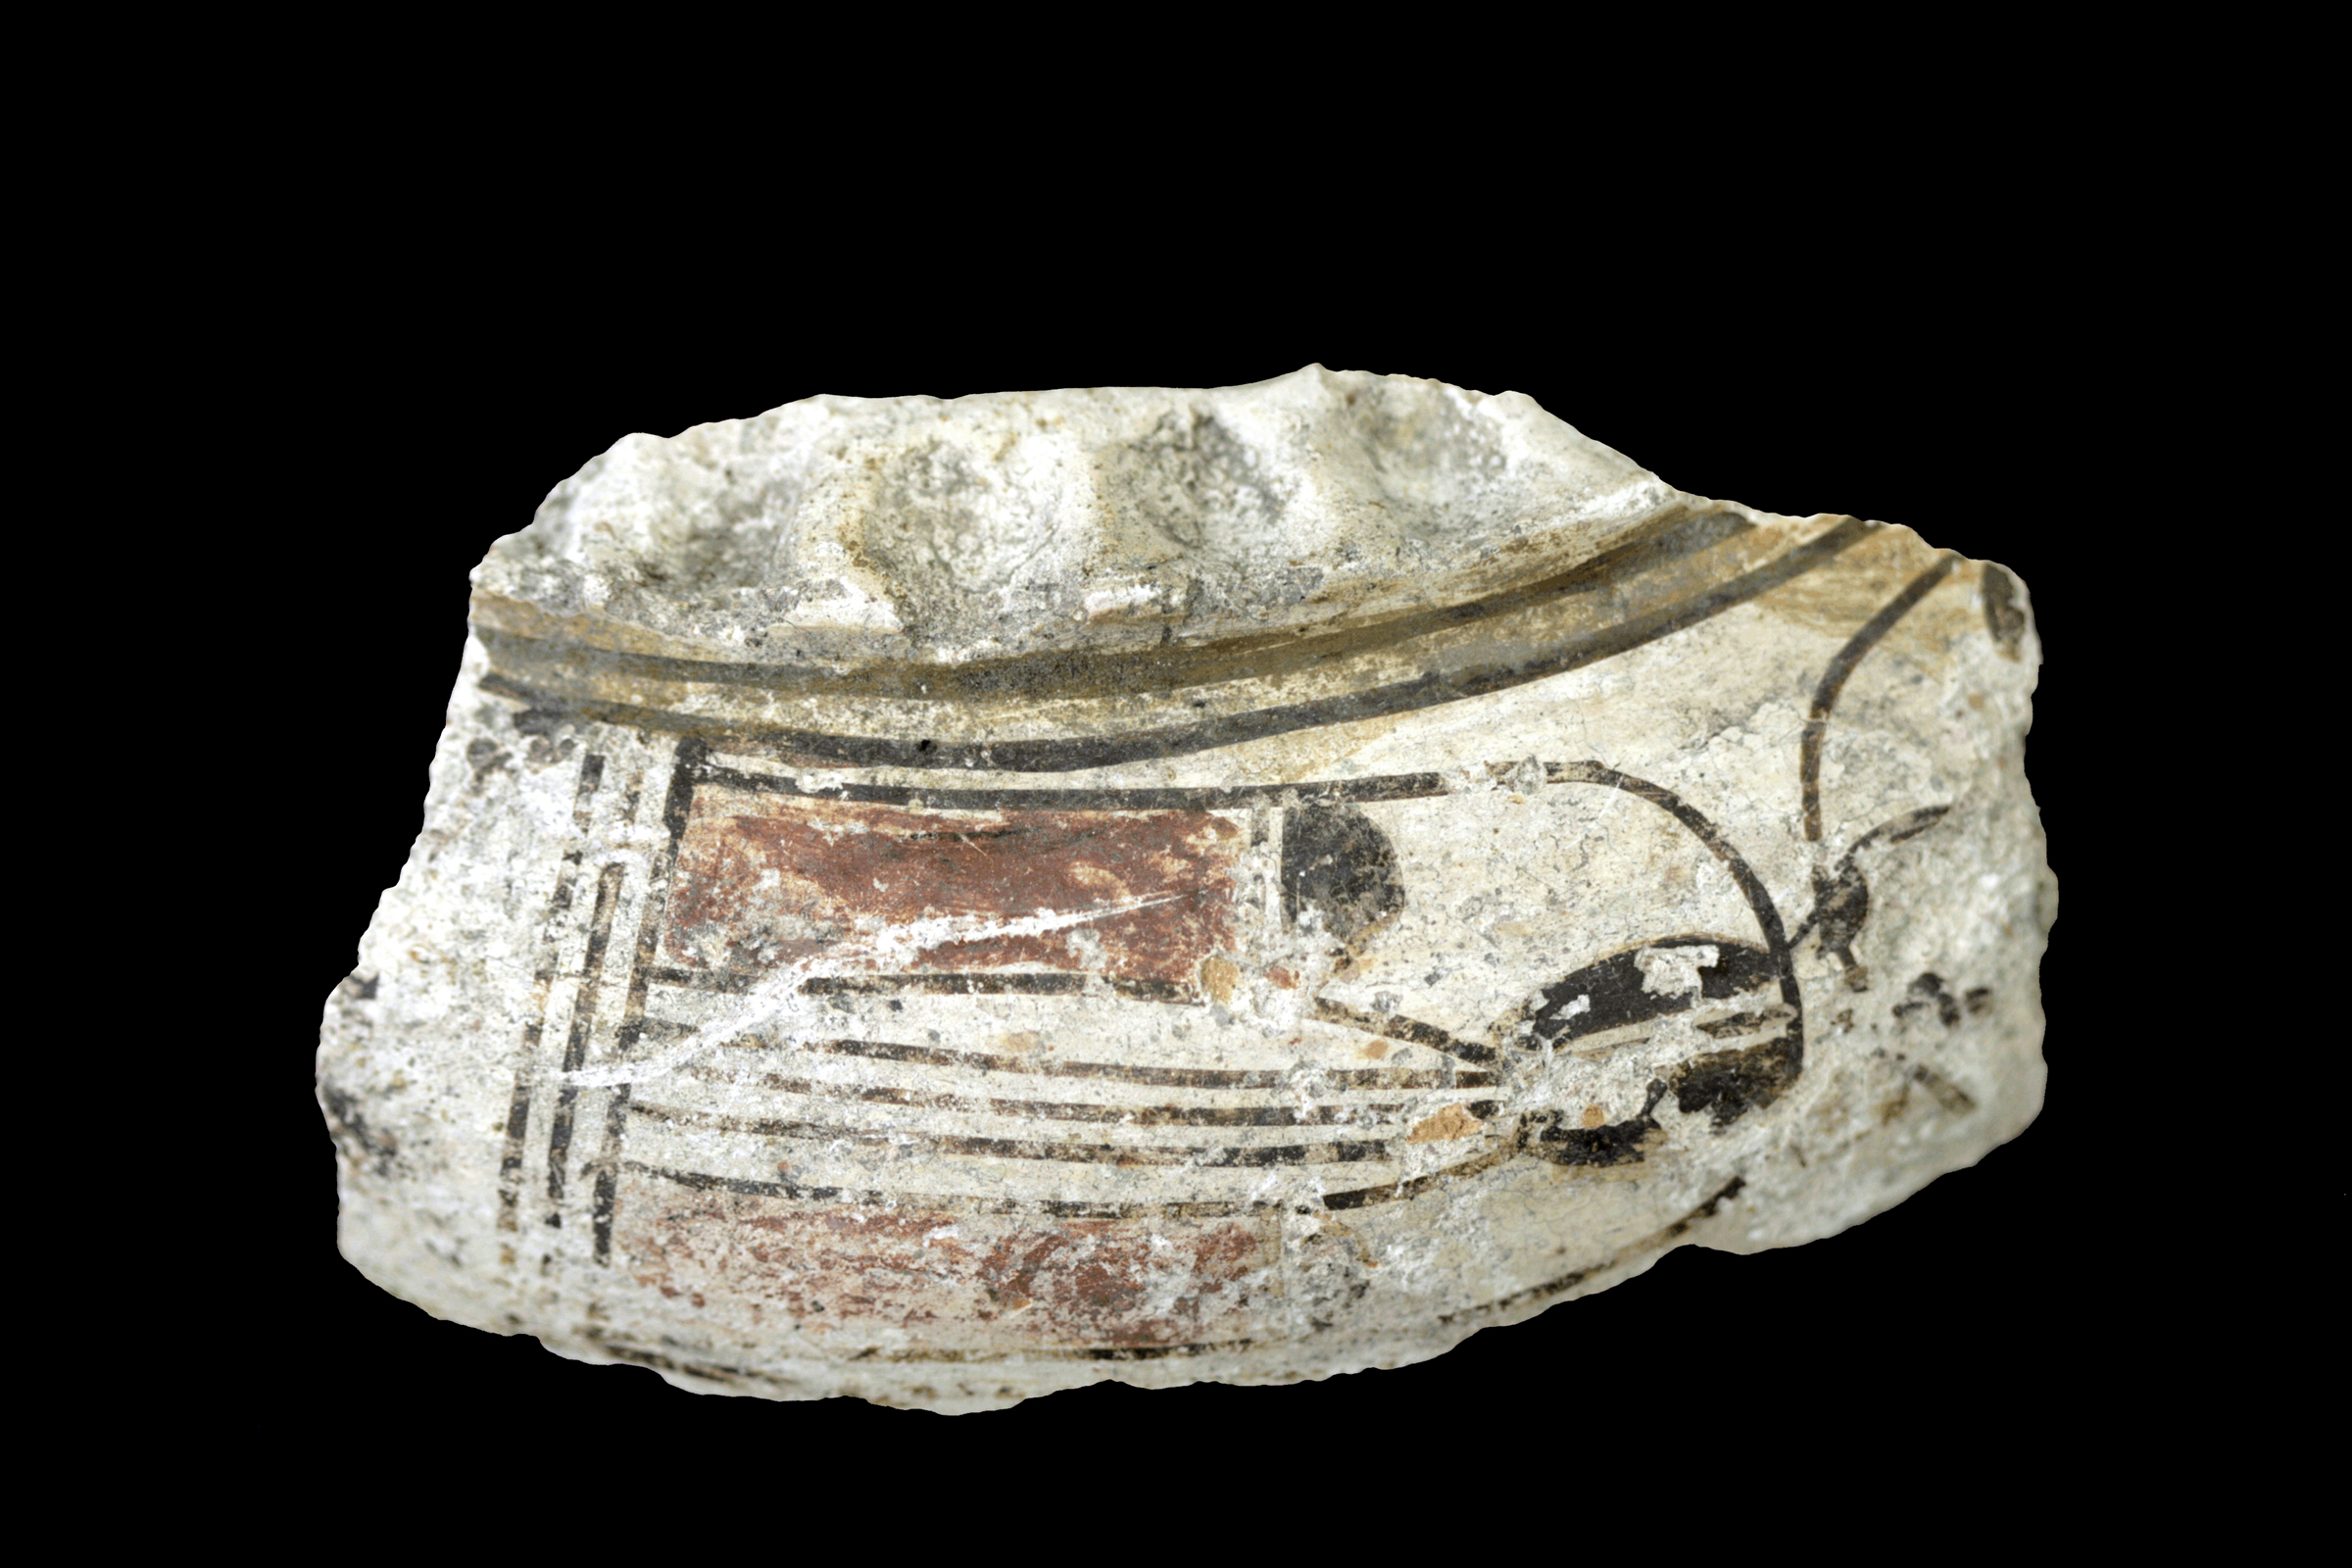 Native American Pottery in Historic Period Tucson – Desert Archaeology